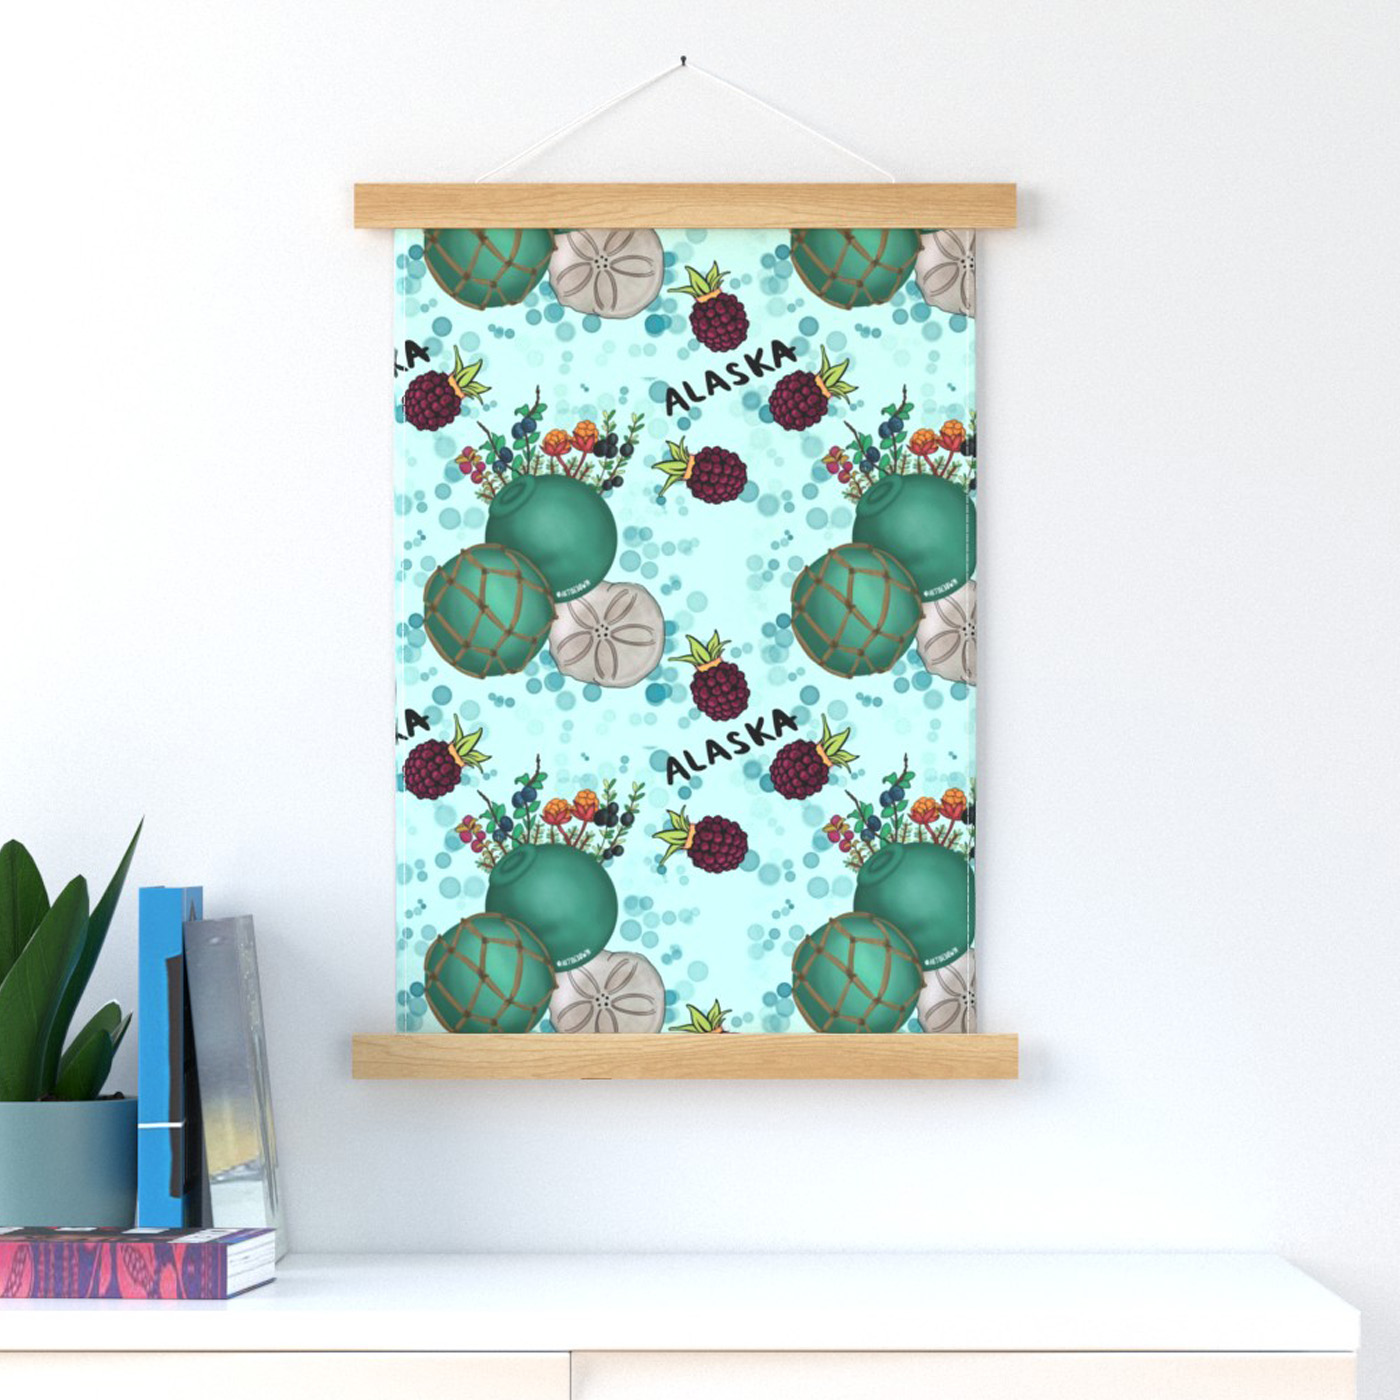 Malorie’s Alaska Treasures design is shown on a Spoonflower wall hanging. This teal and mint colored design features glass balls, sand dollars, mossberries and salmonberries from her native Alaskan environment.